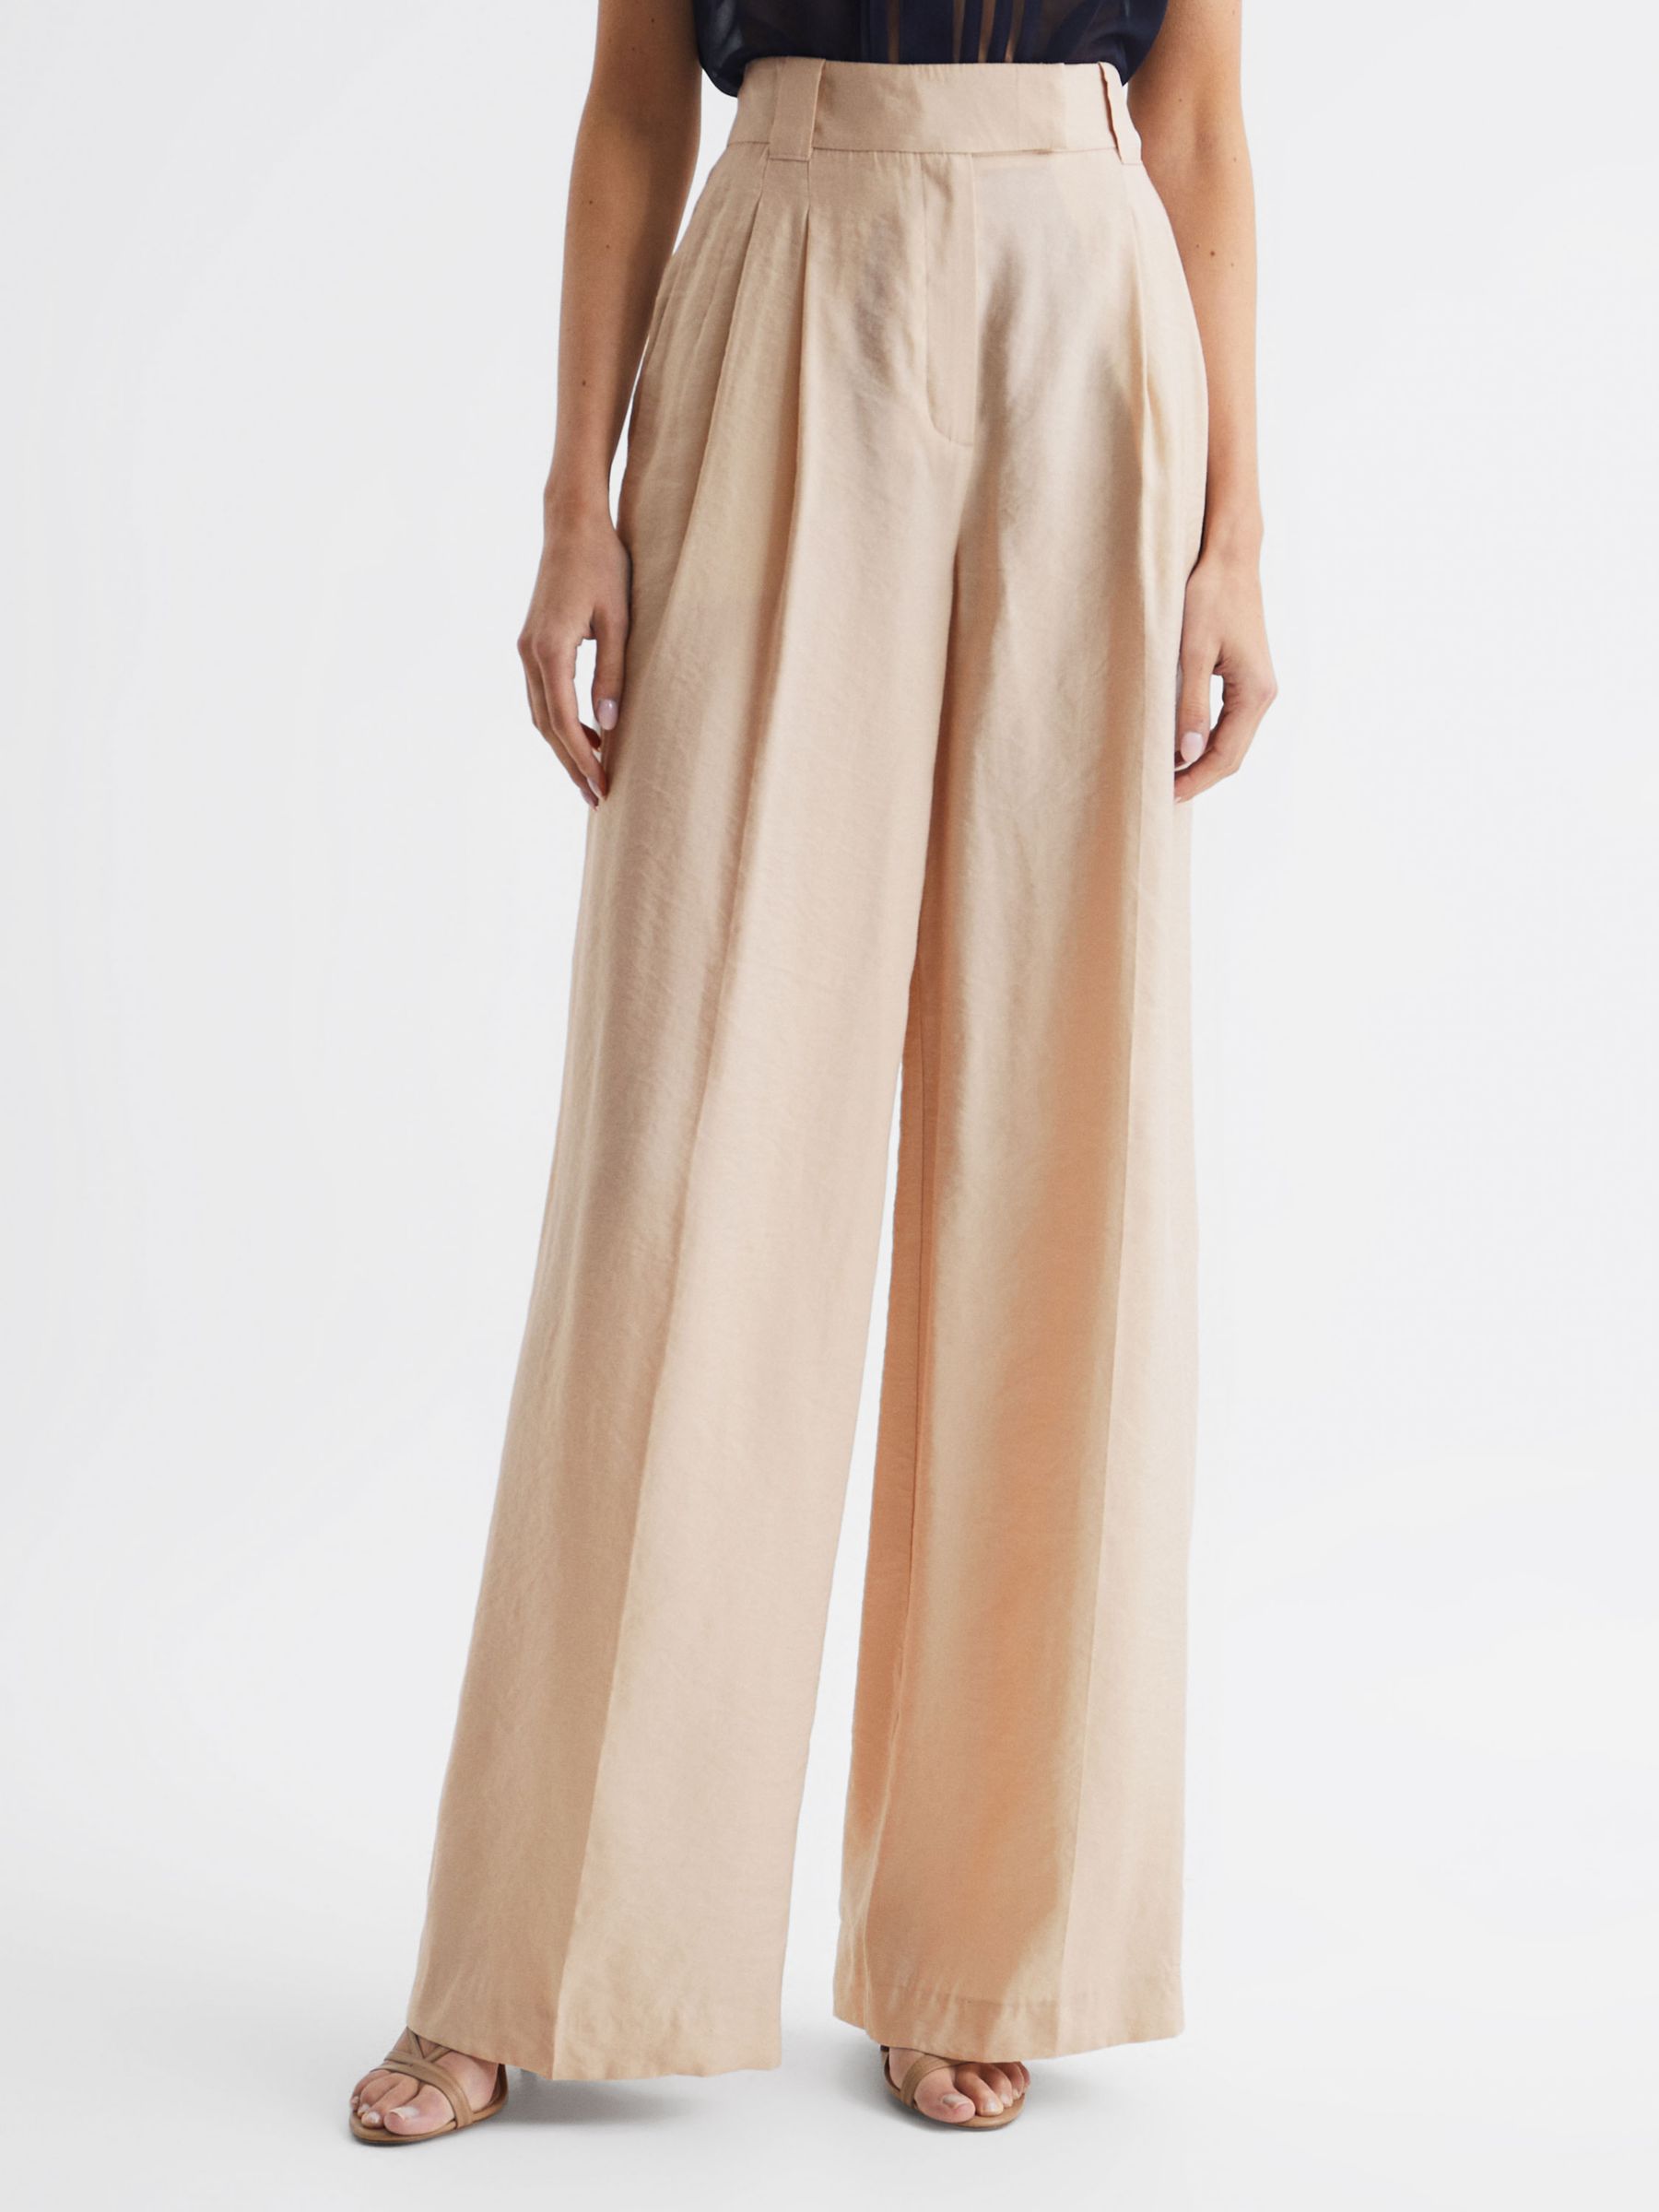 Reiss Izzie Wide Leg Trousers, Nude at John Lewis & Partners